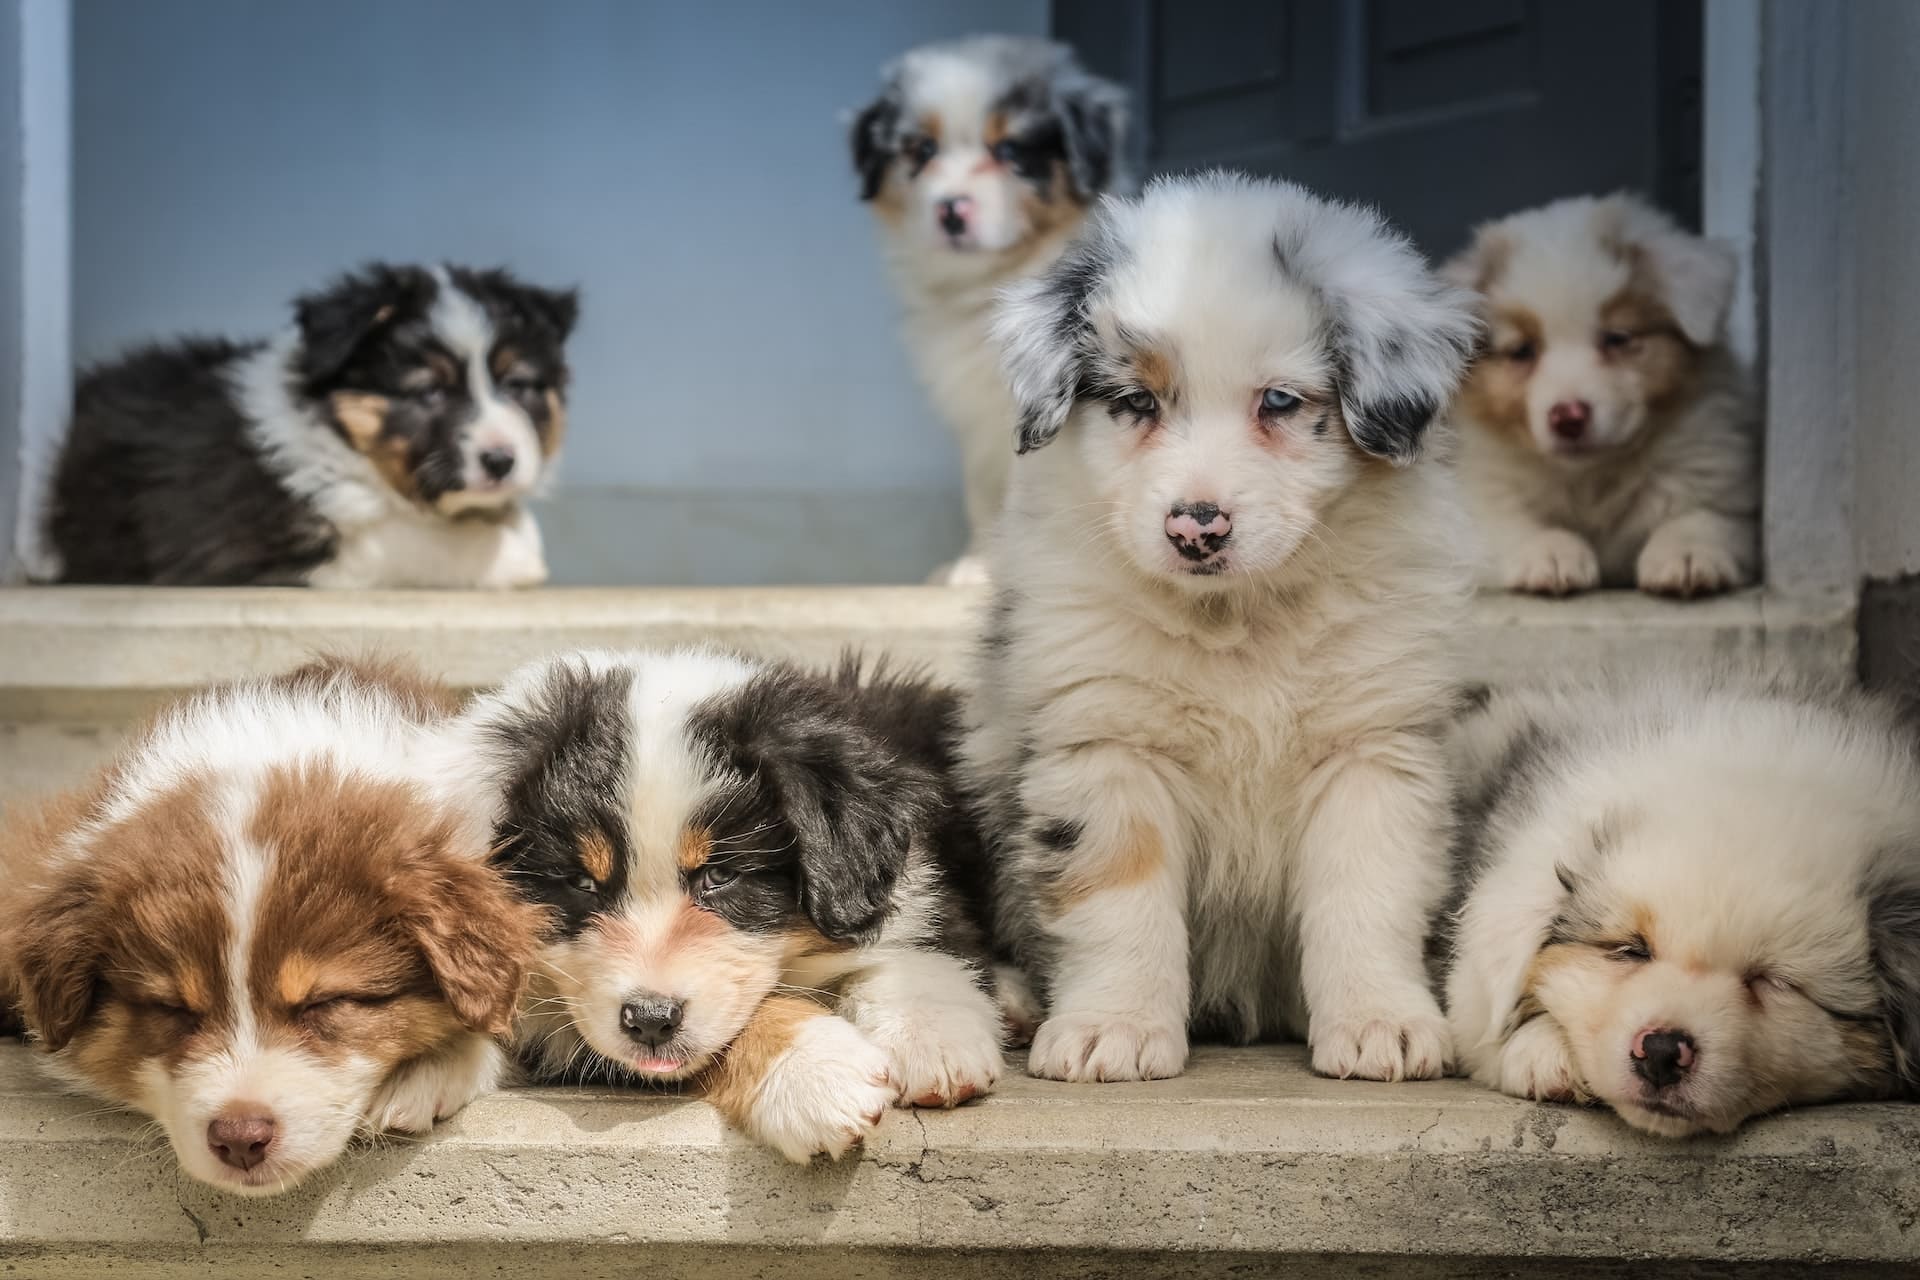 When Can Puppies Climb Stairs Safely? - Sweetie